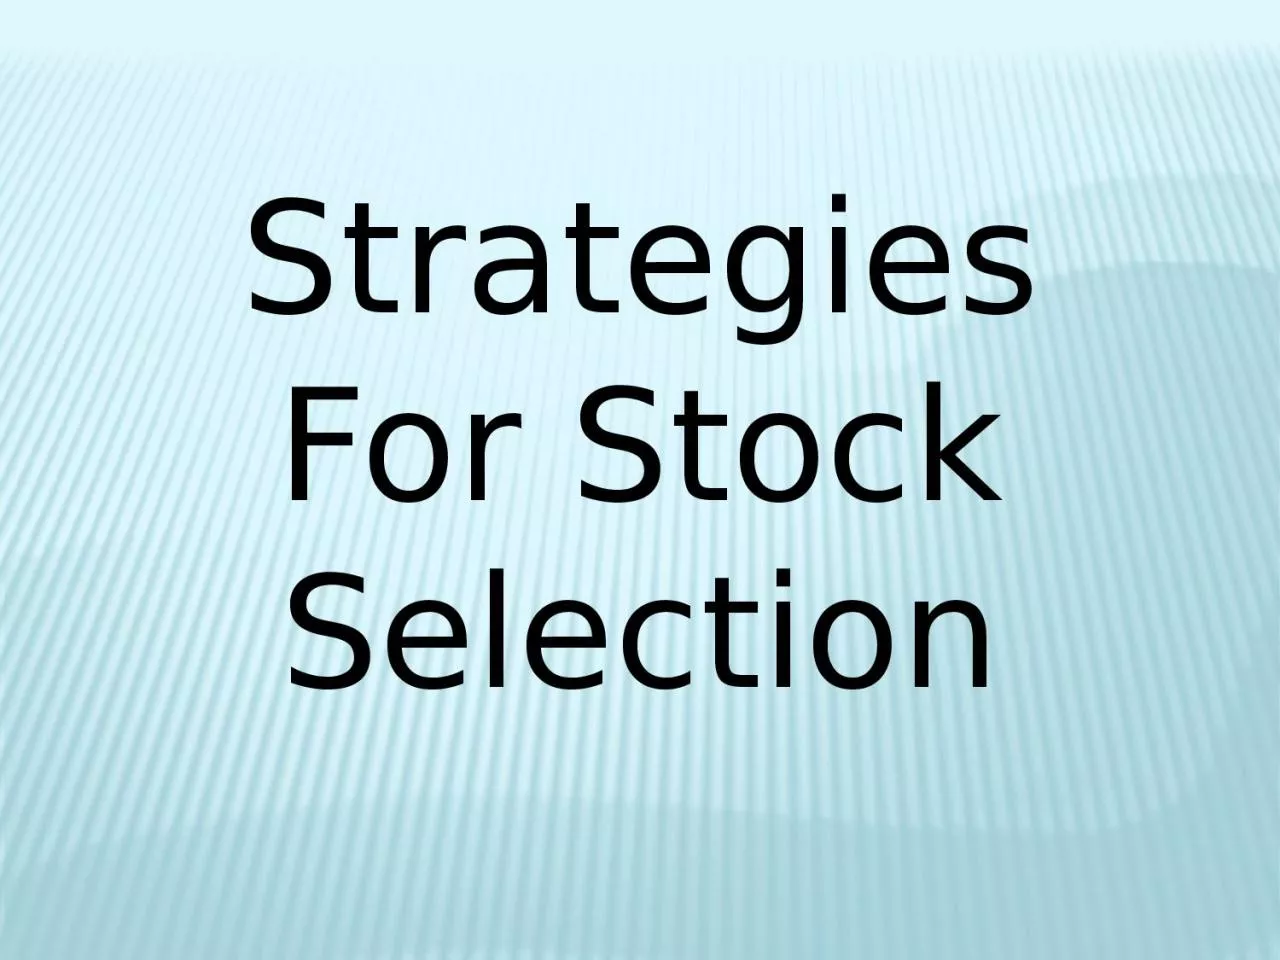 Strategies For Stock Selection